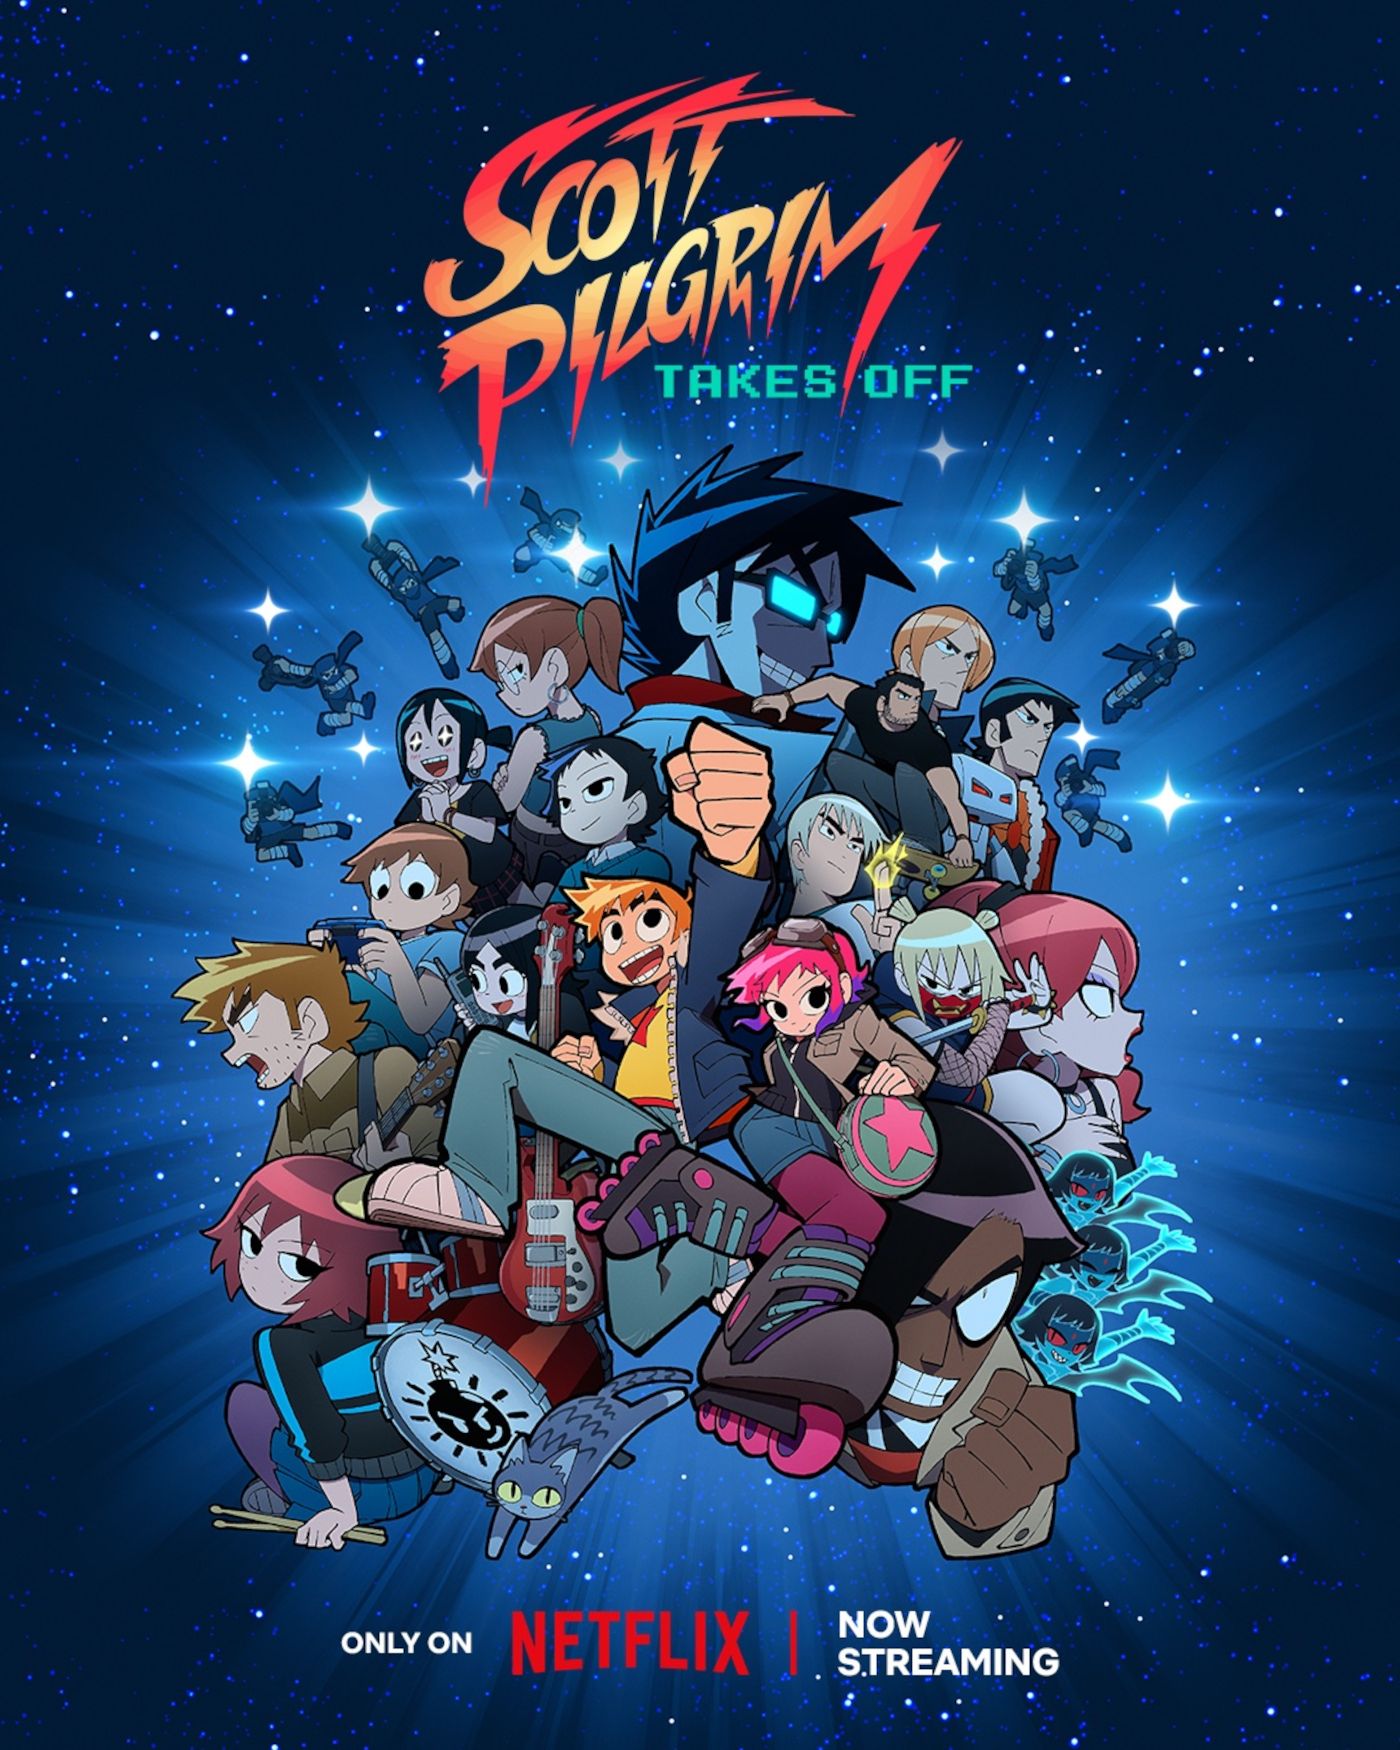 Scott Pilgrim Takes Off Reinvents The Series in the Best Way Possible – Review